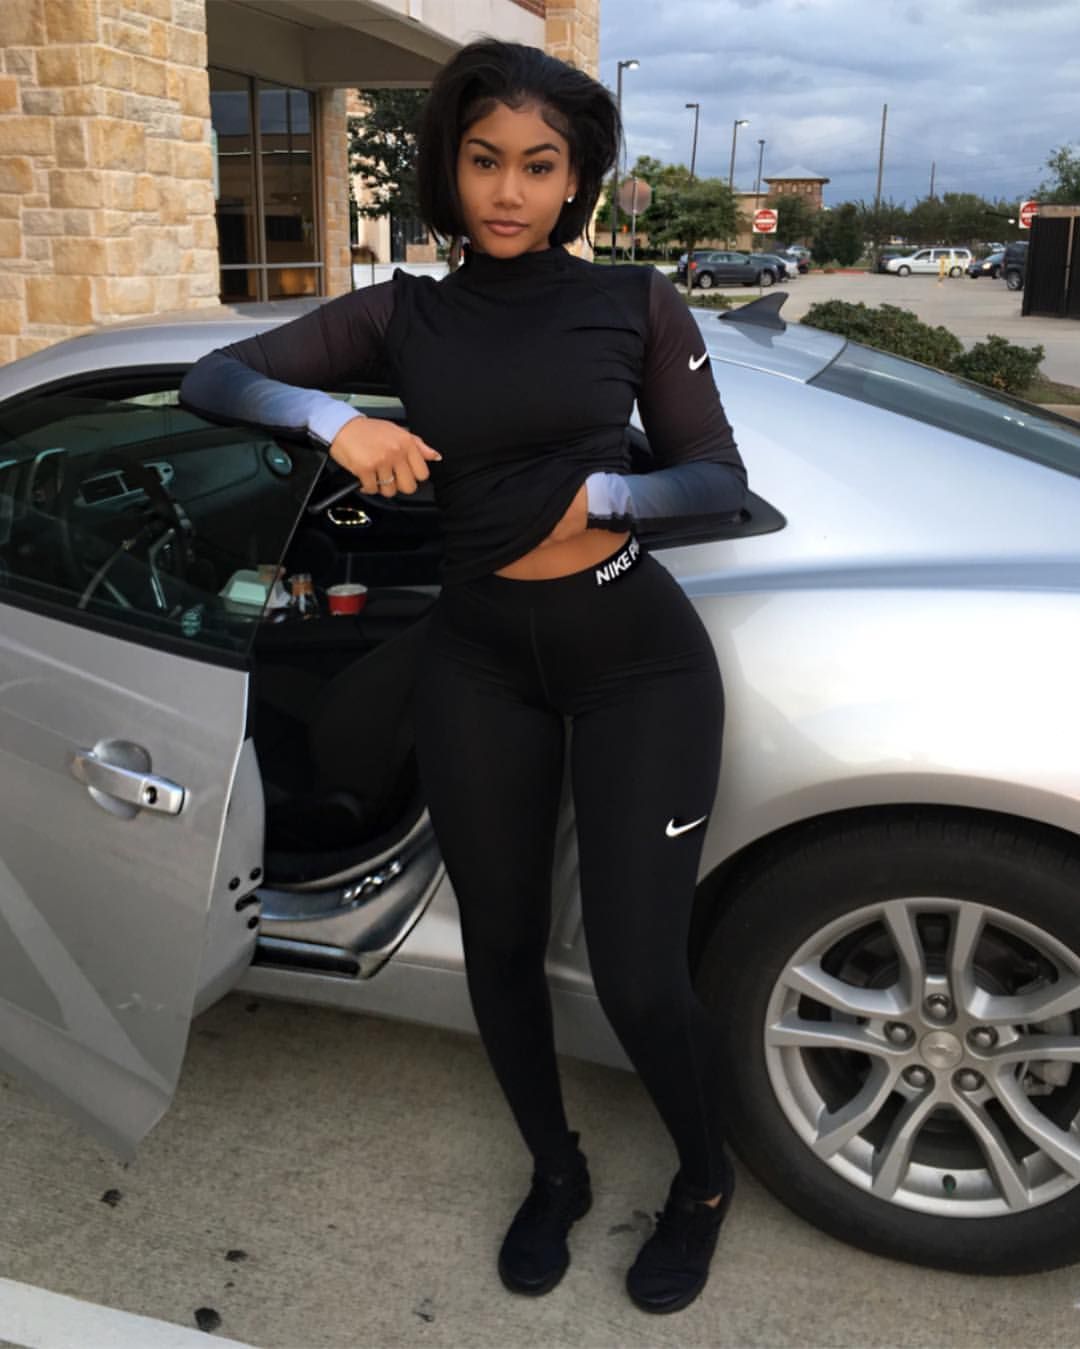 32.4k Likes, 441 Comments – Brittany Campbelle (@briitcampbelle) on Instagram: “Kicked kickboxing class ass  #BrittanyCampbelle”